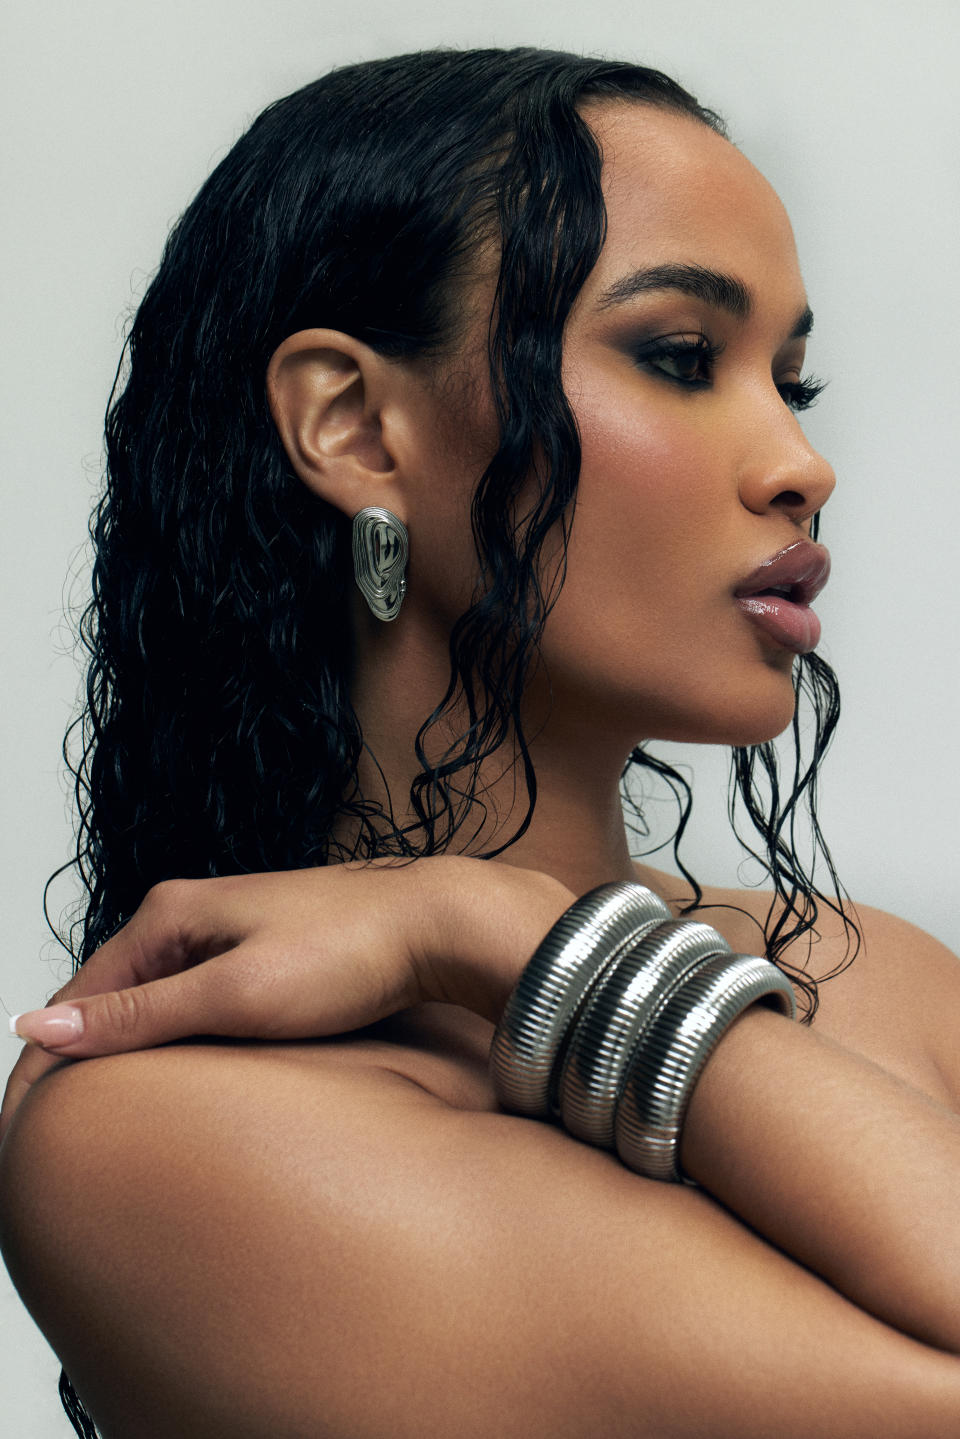 Styles from Jason Bolden's 8 Other Reasons jewelry collection